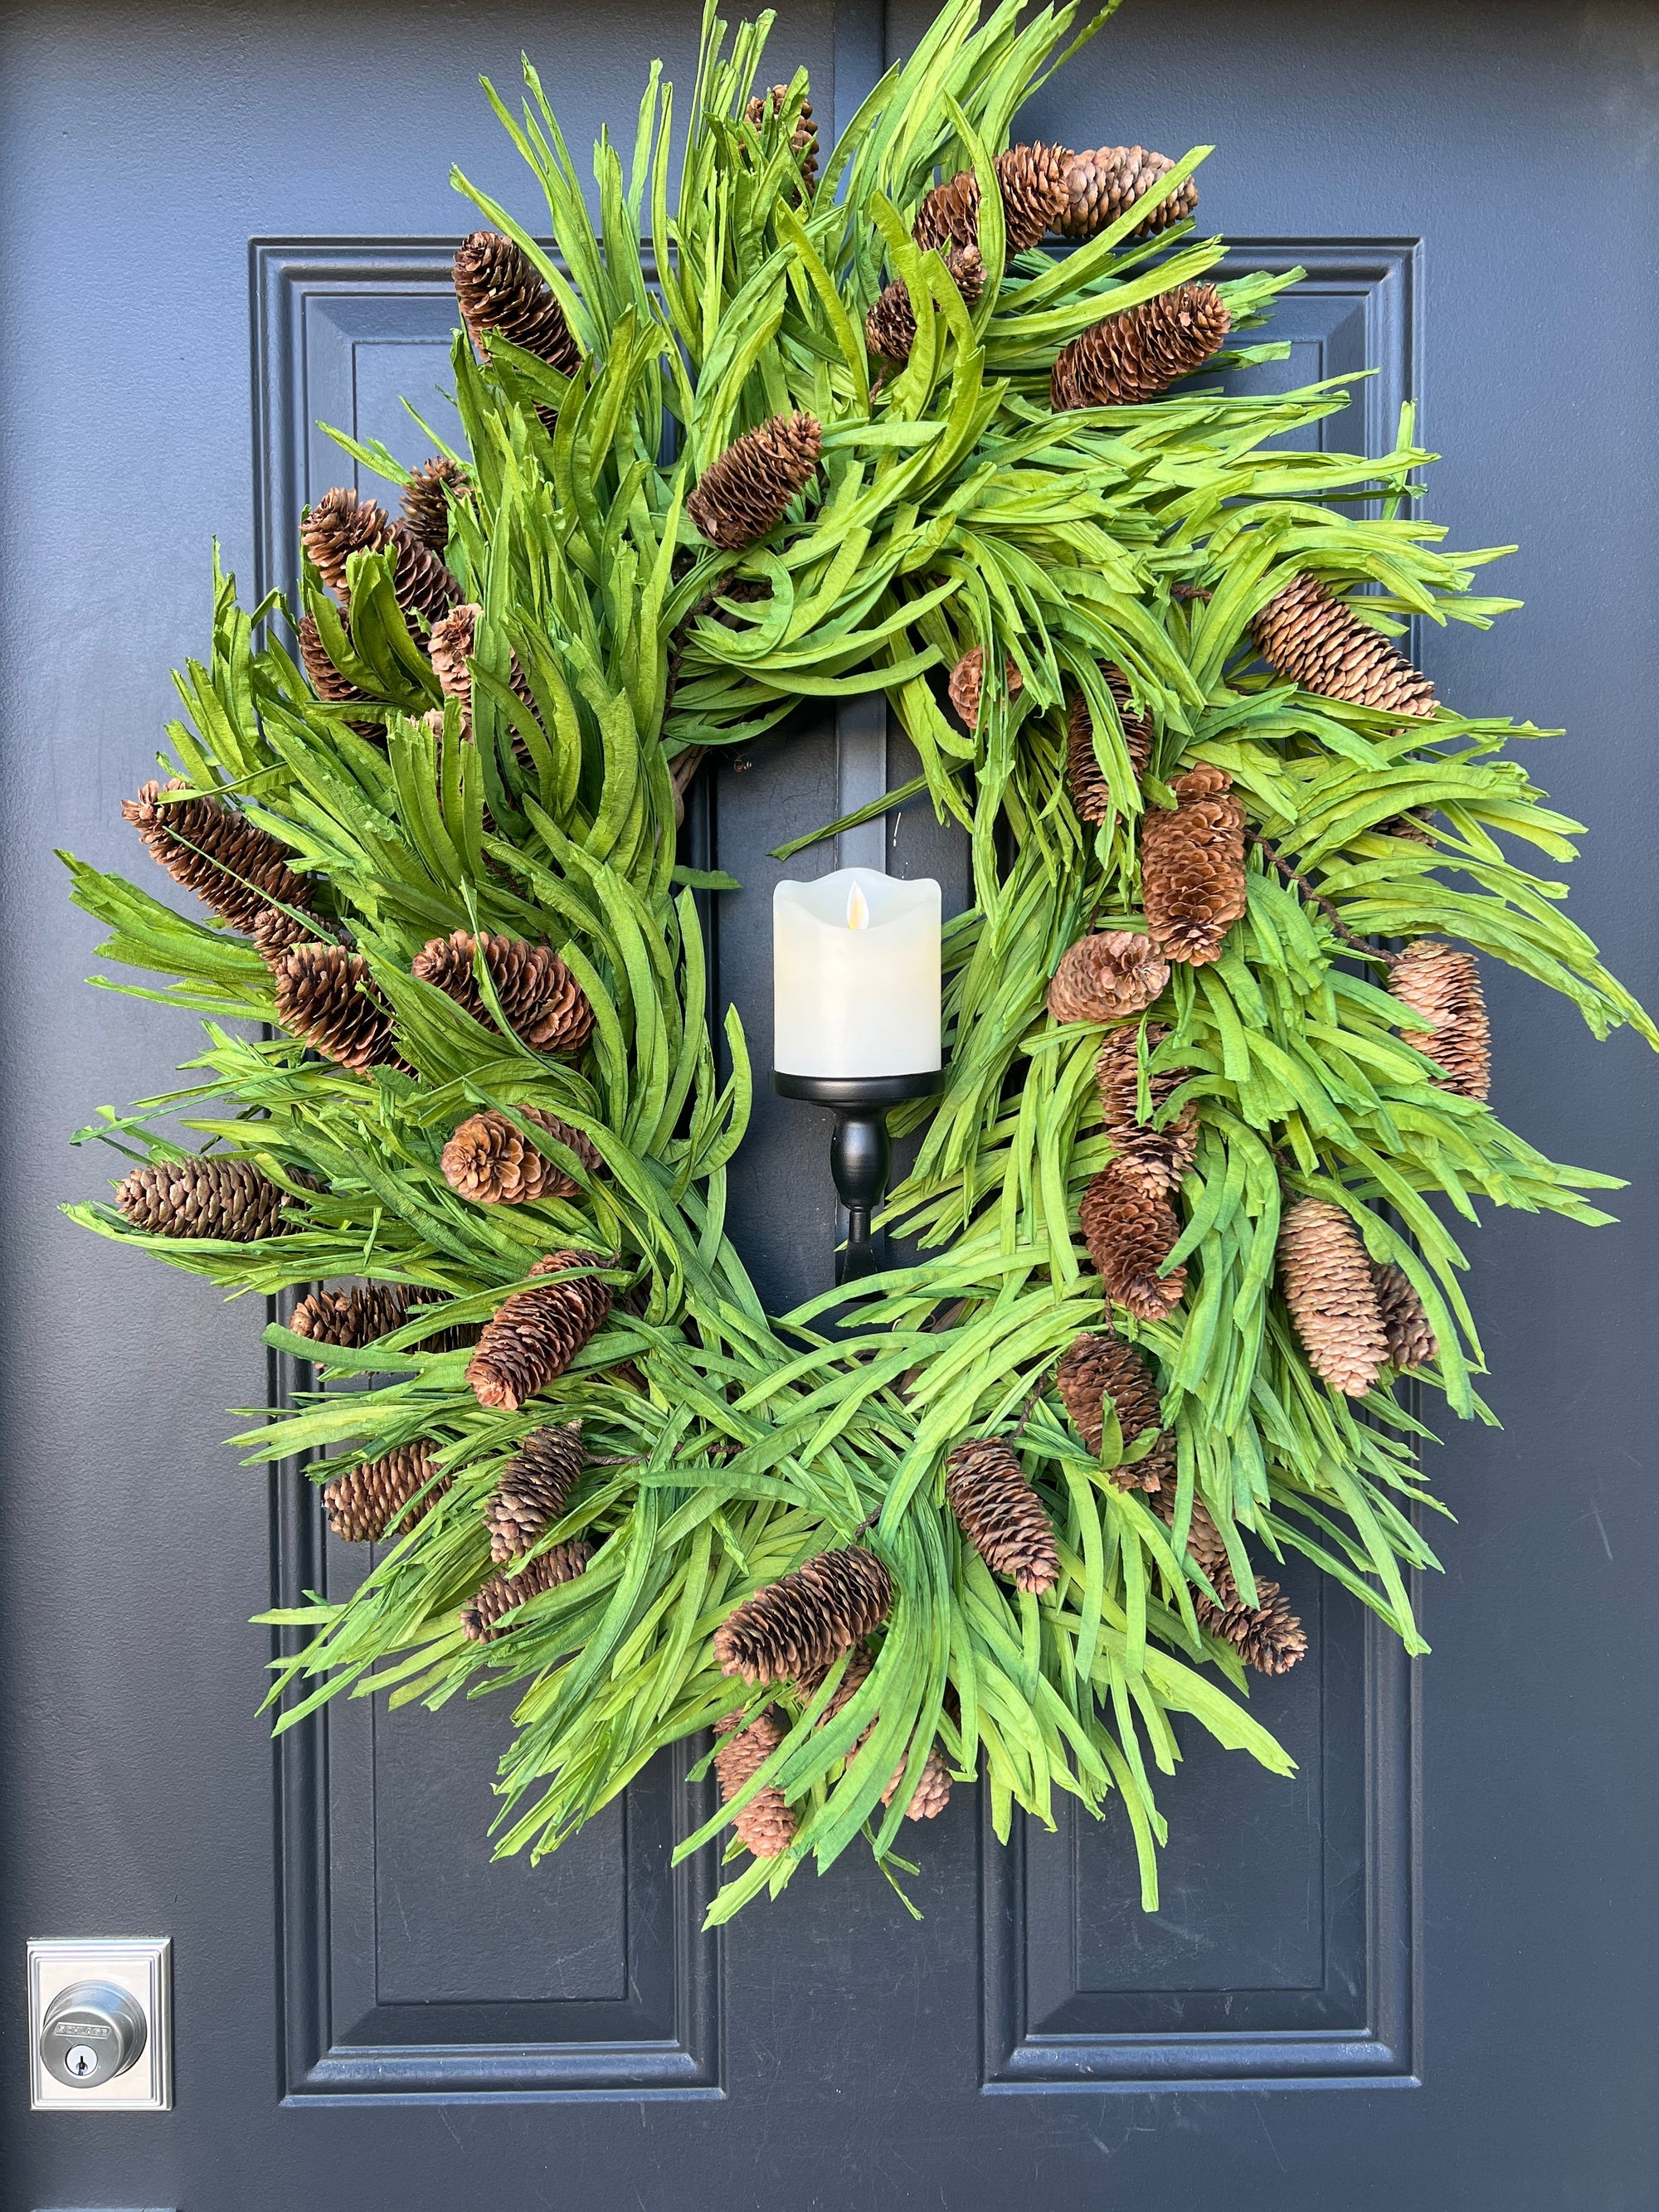 Grassy Christmas Oval Wreath with Flickering Candle - Ready to Ship